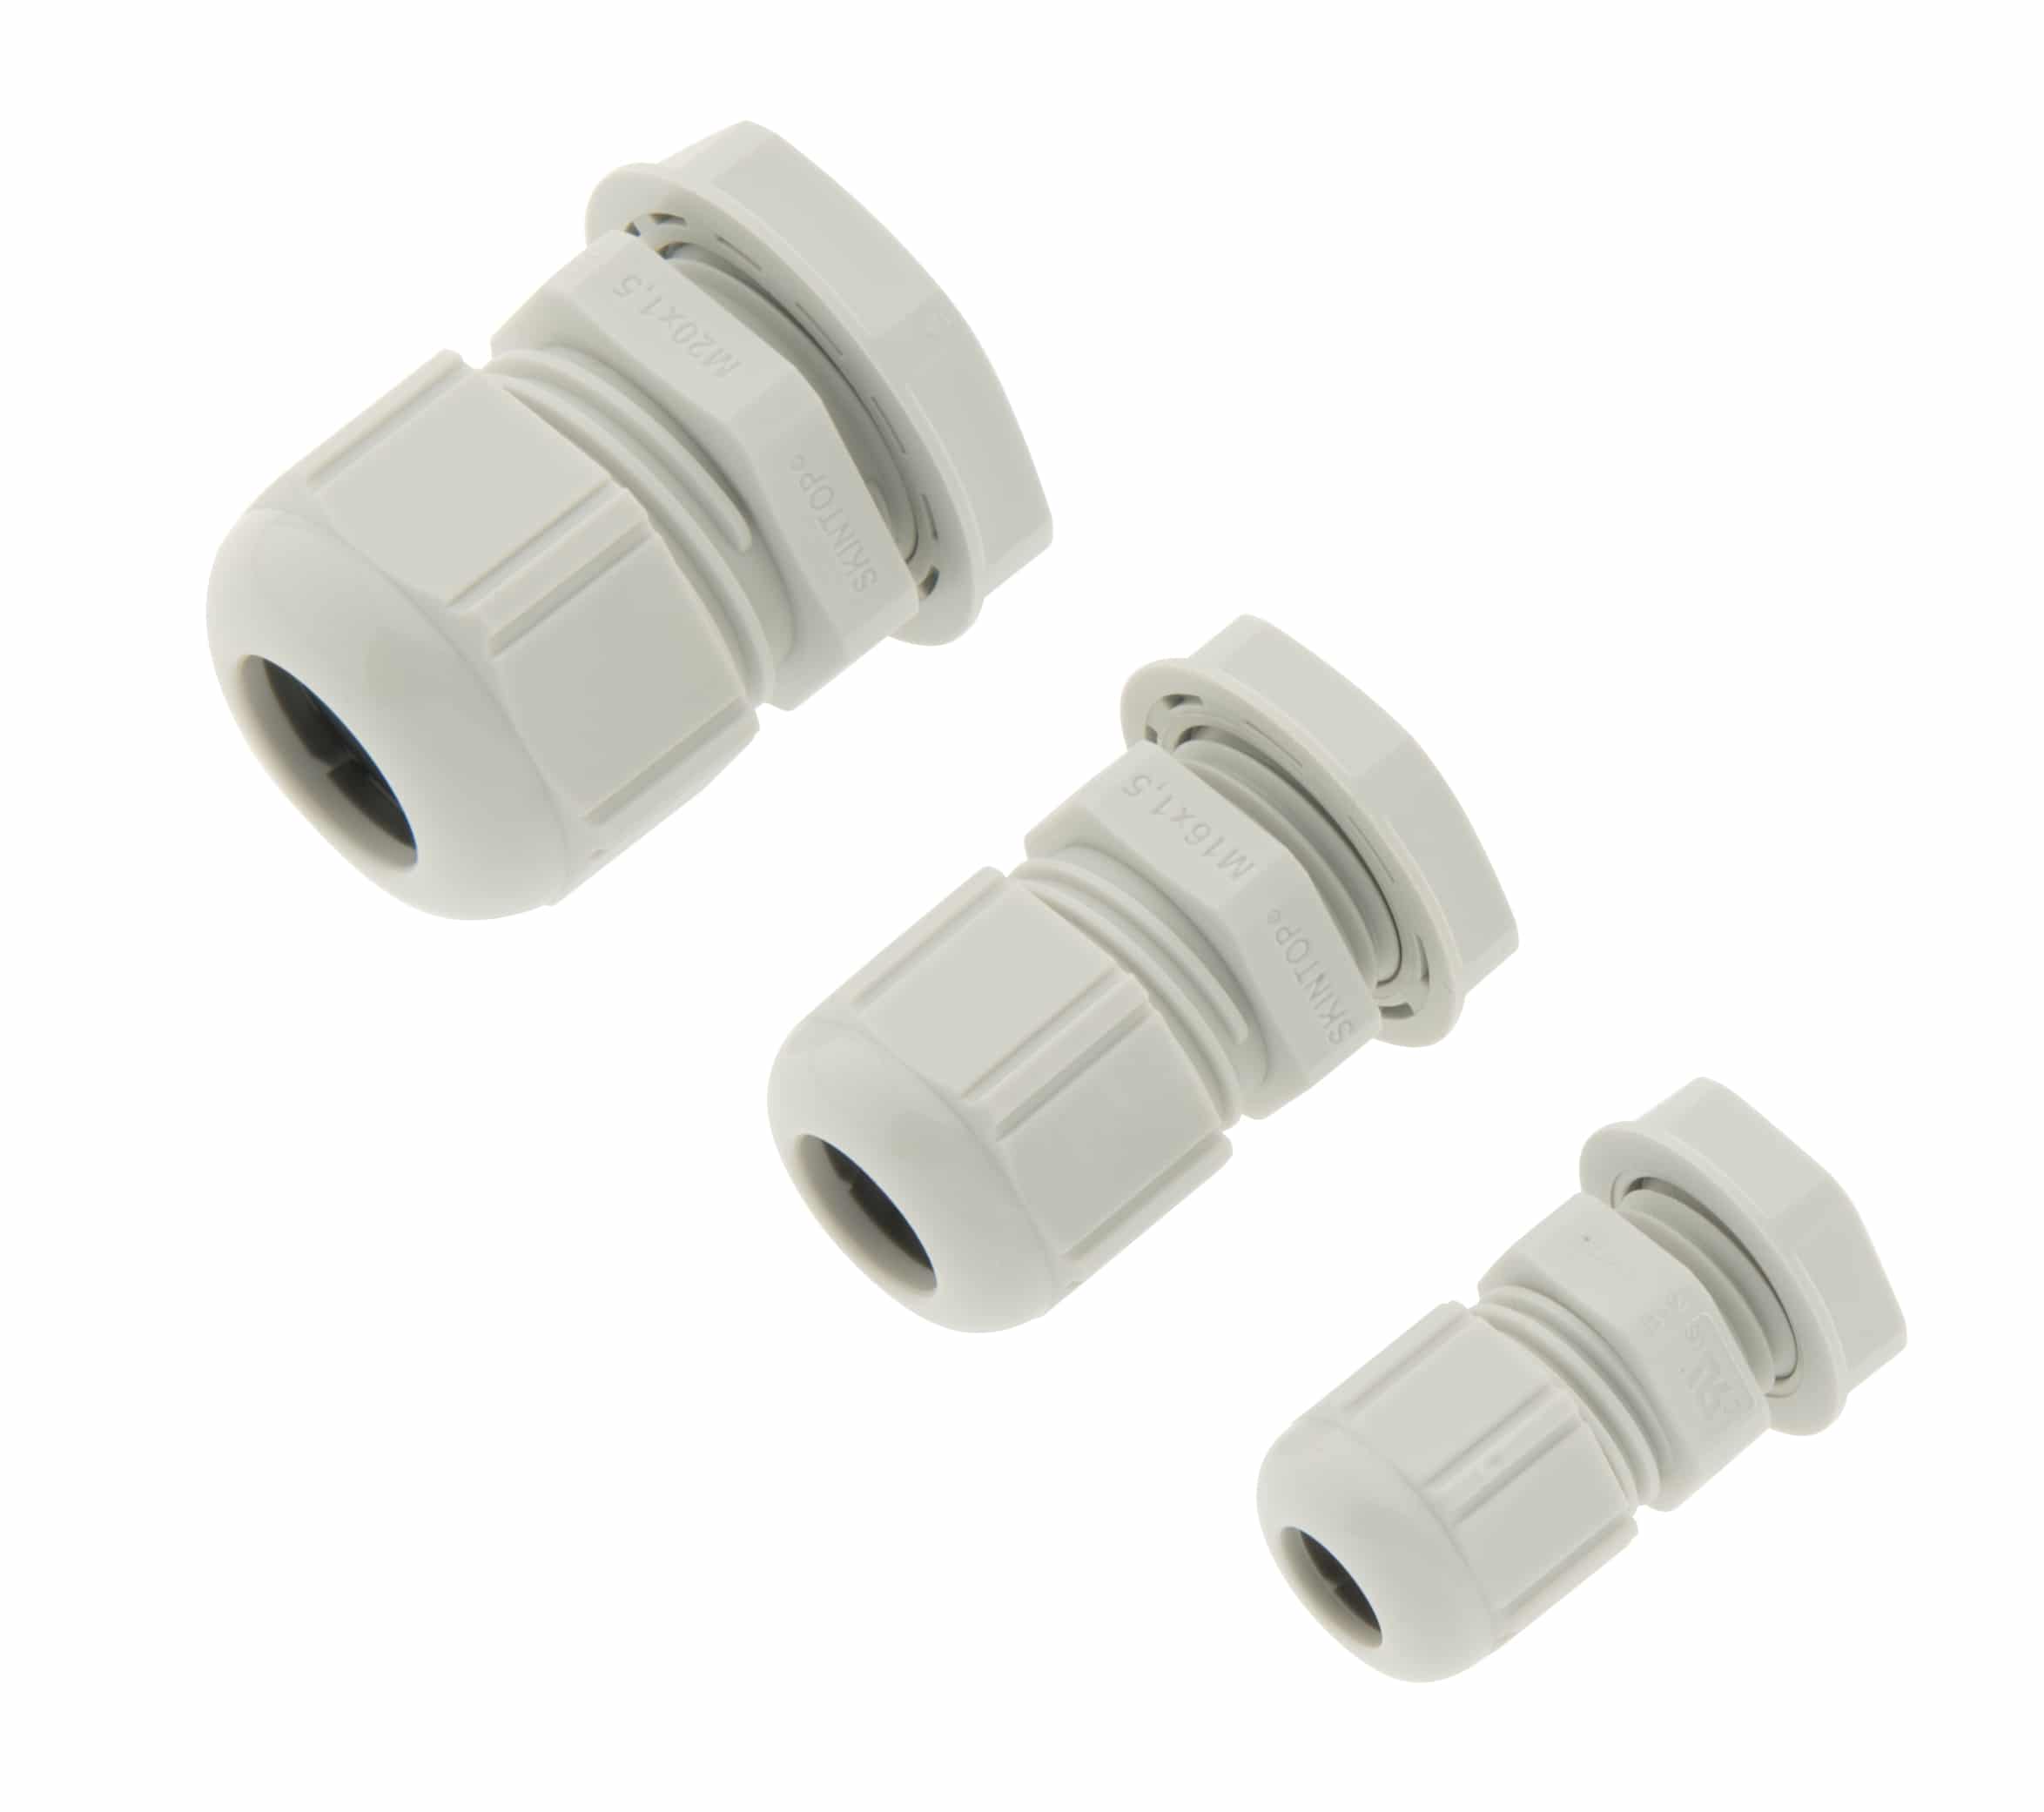 PG-cable glands